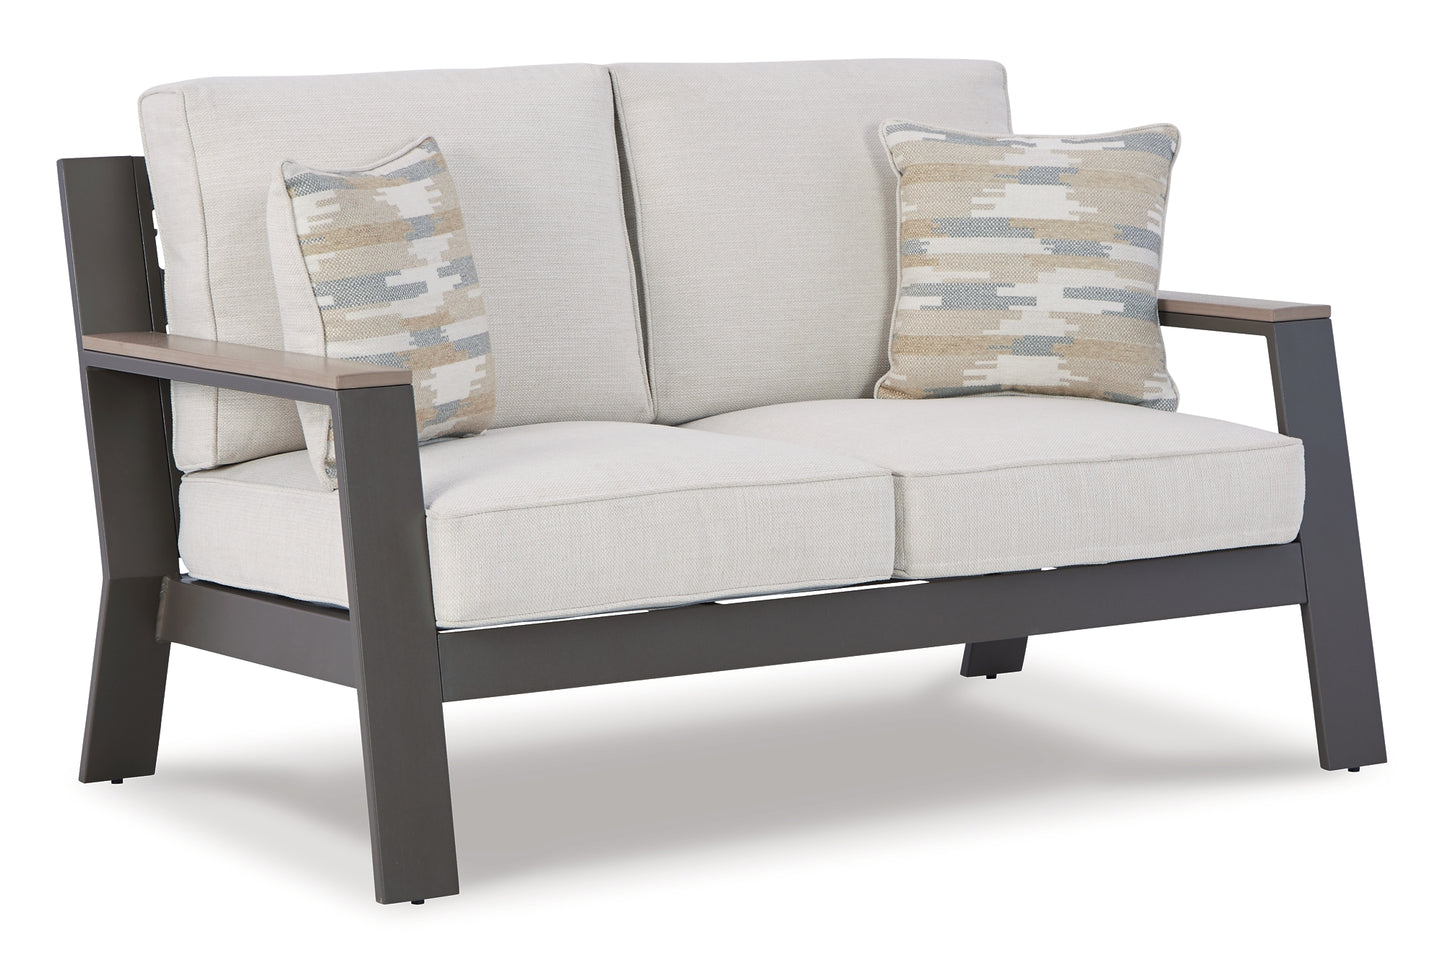 Tropicava Outdoor Loveseat with Coffee Table and End Table Wilson Furniture (OH)  in Bridgeport, Ohio. Serving Moundsville, Richmond, Smithfield, Cadiz, & St. Clairesville